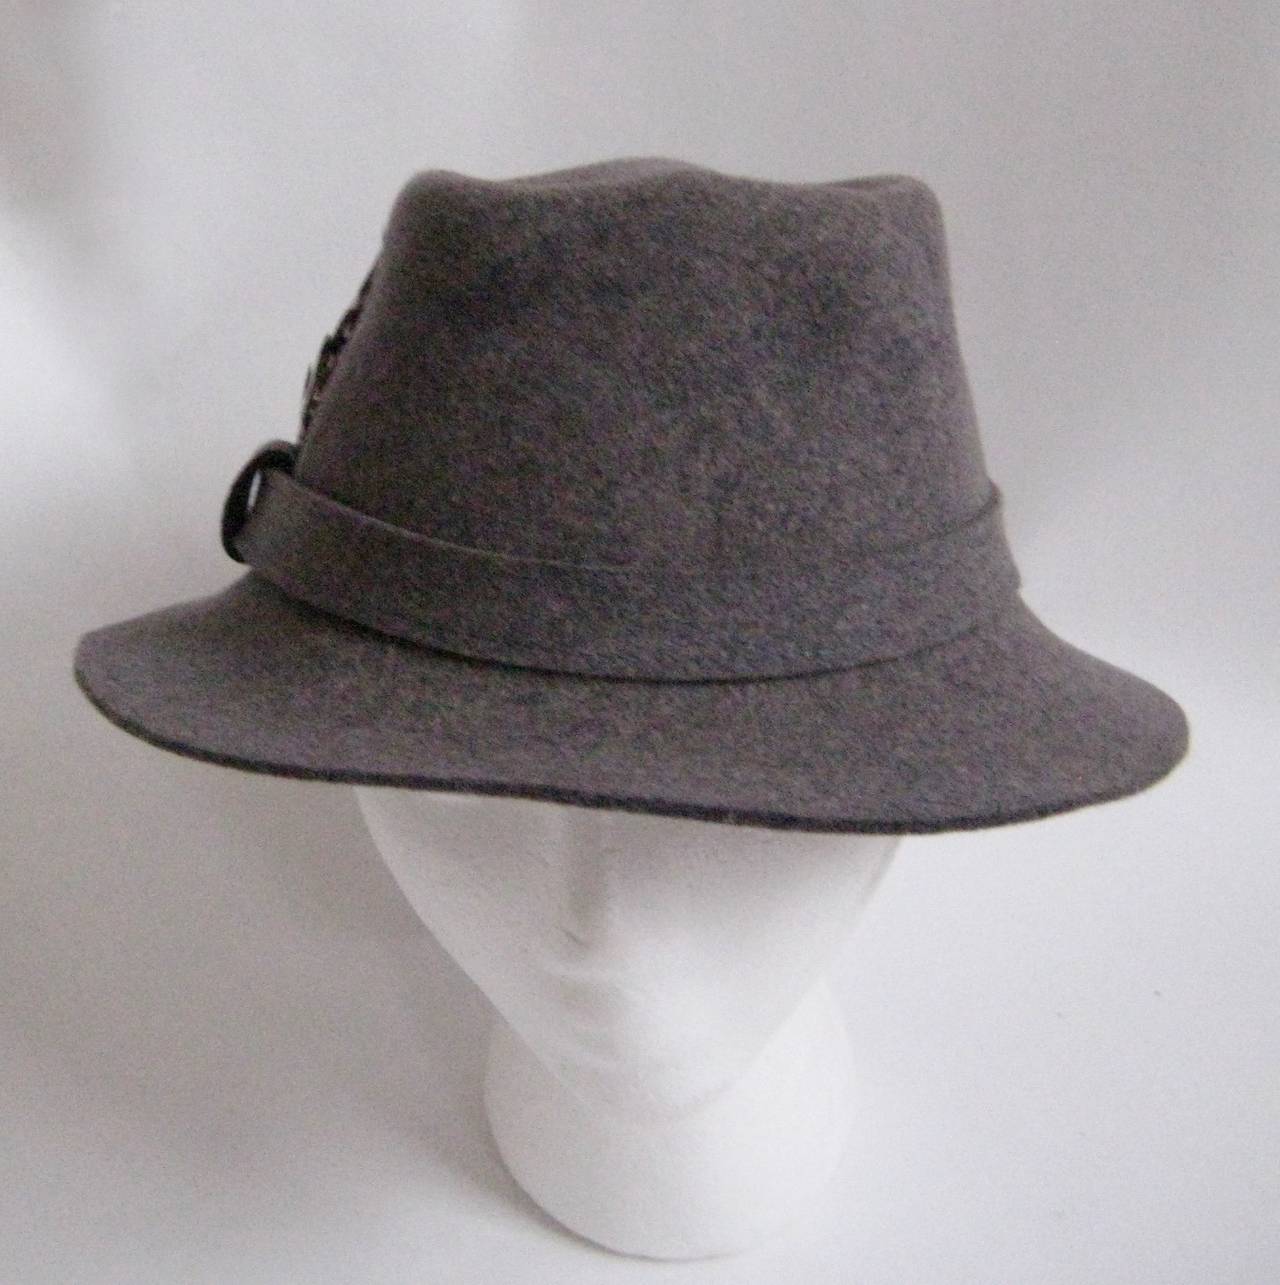 Lovely Halston wool felt fedora with a matching band and a tiny feather.
This hat measures approx around when measured from the inside